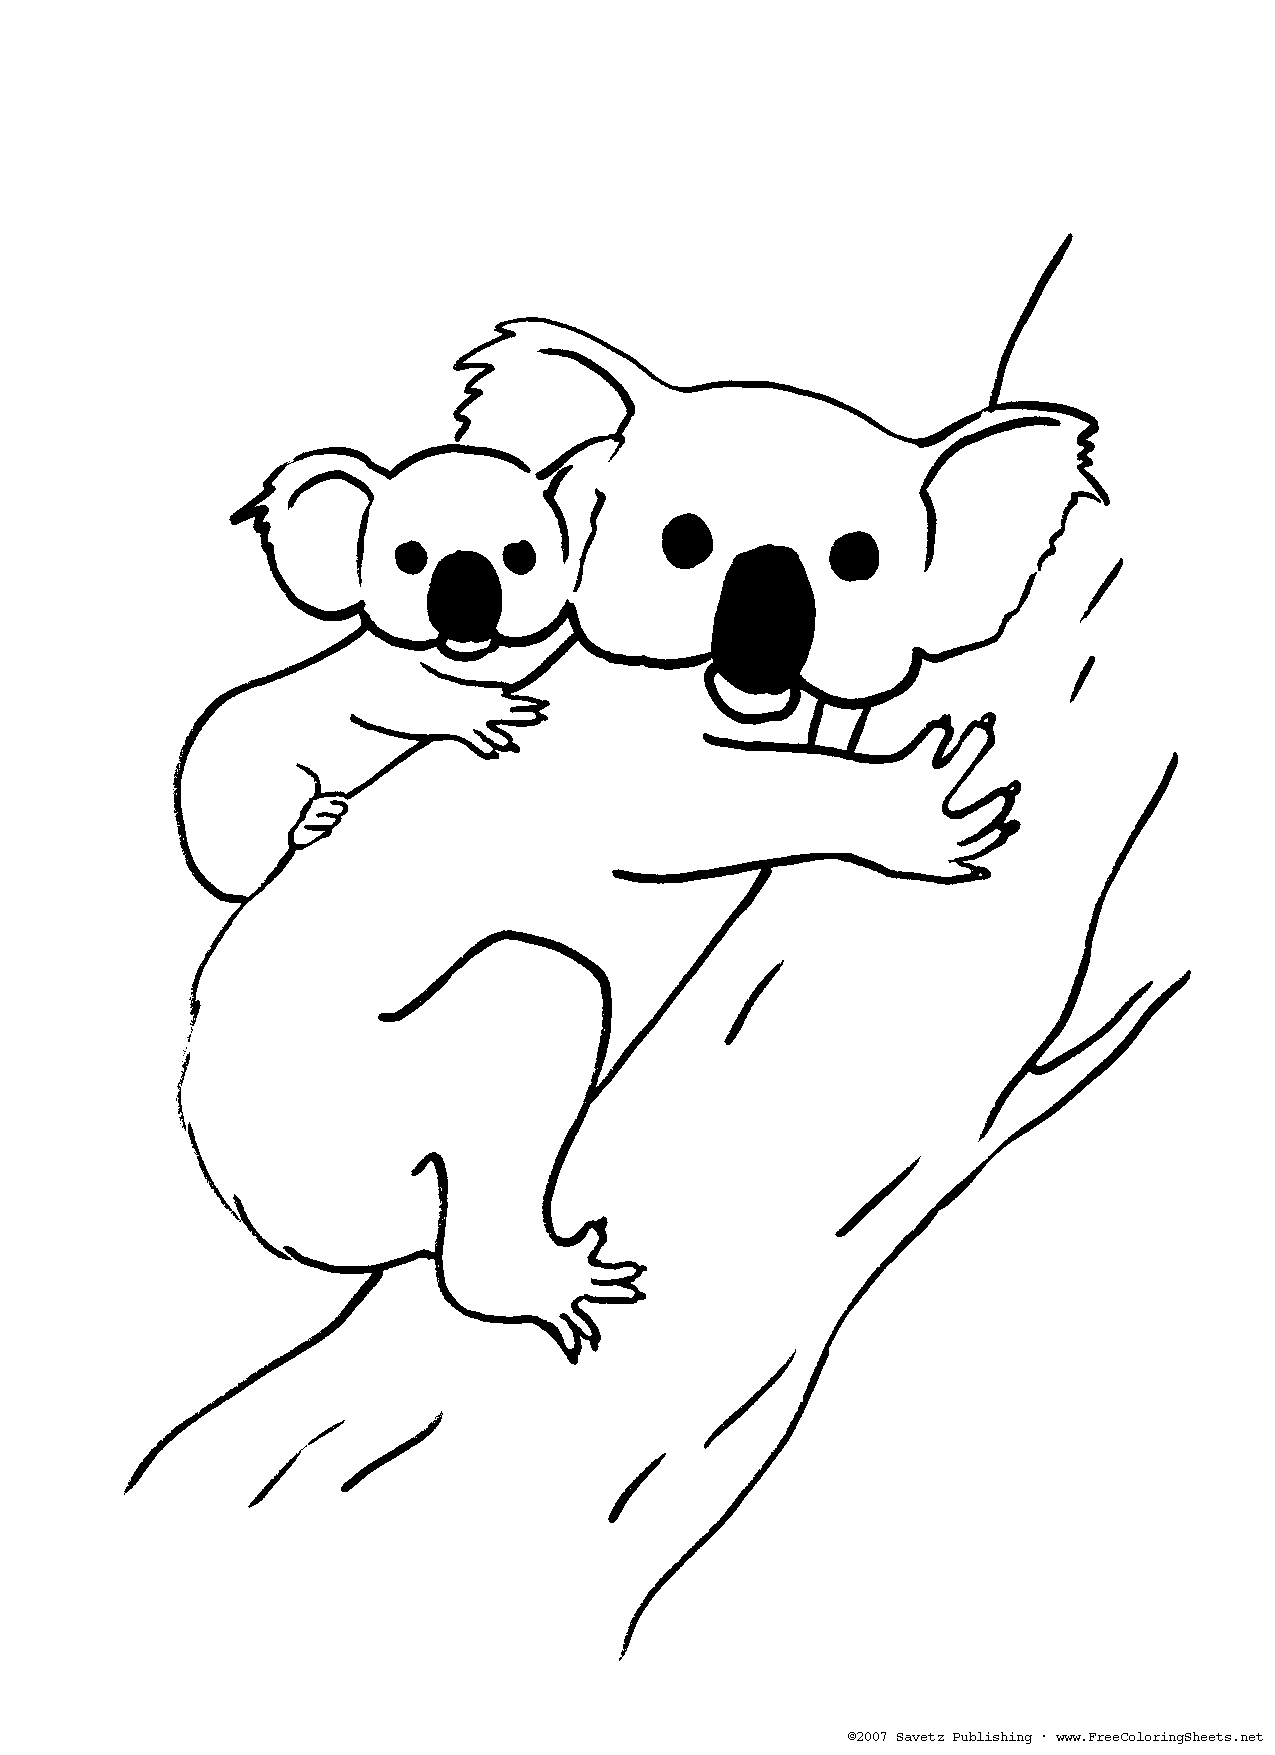 Koala Bear Coloring Page Template - Get Coloring Pages